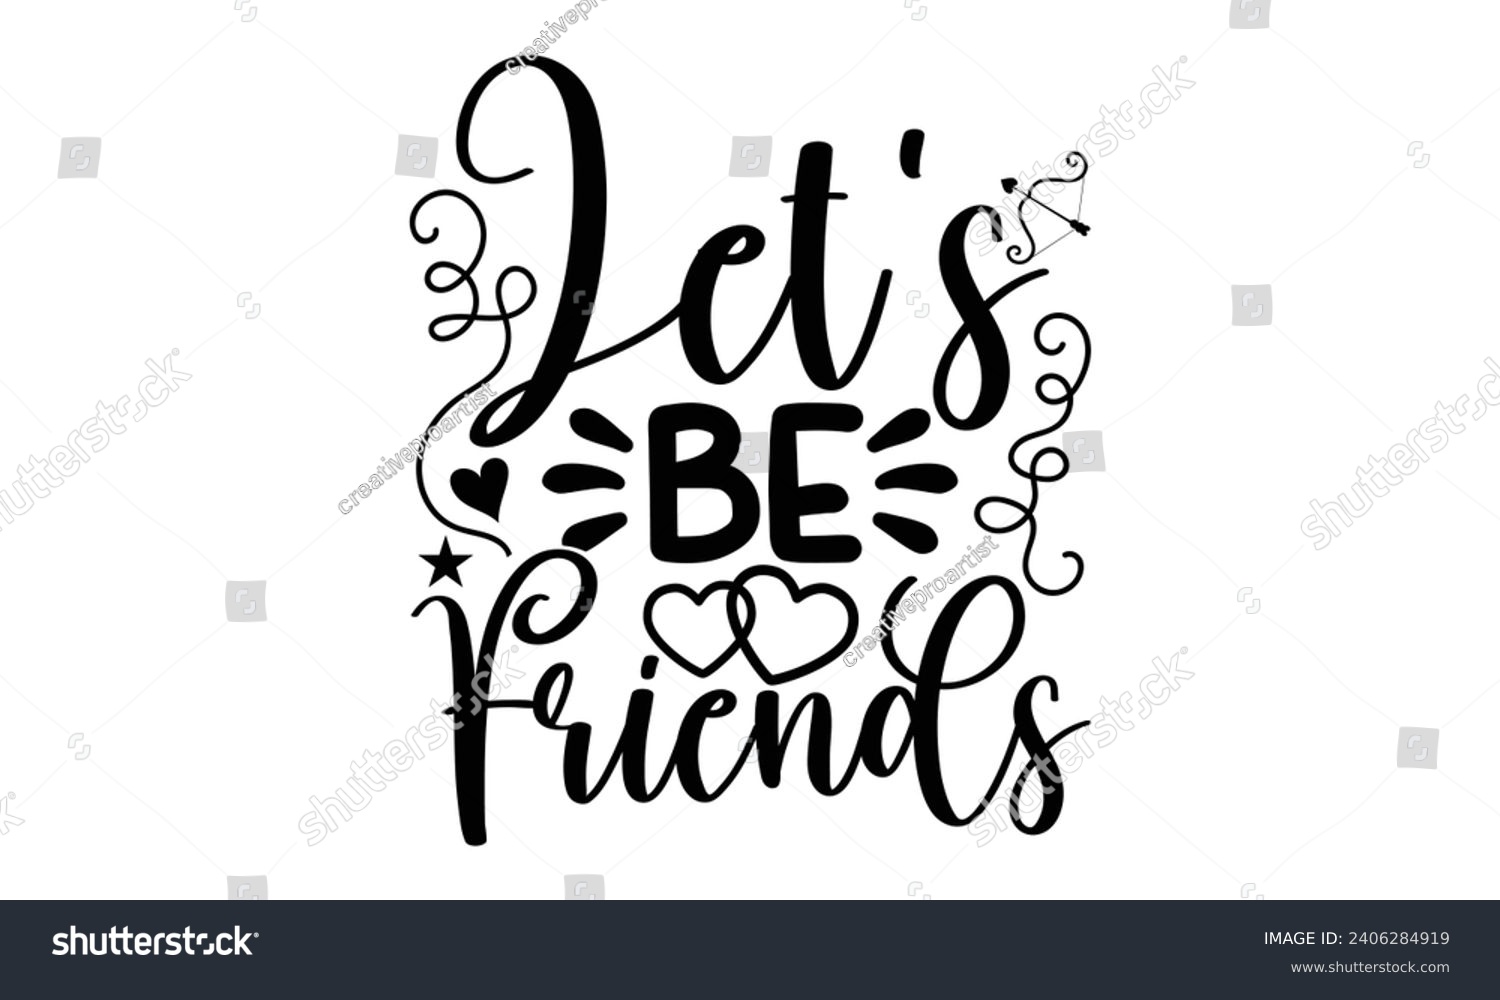 SVG of Let’s Be Friends- Best friends t- shirt design, Hand drawn lettering phrase, Illustration for prints on bags, posters, cards eps, Files for Cutting, Isolated on white background. svg